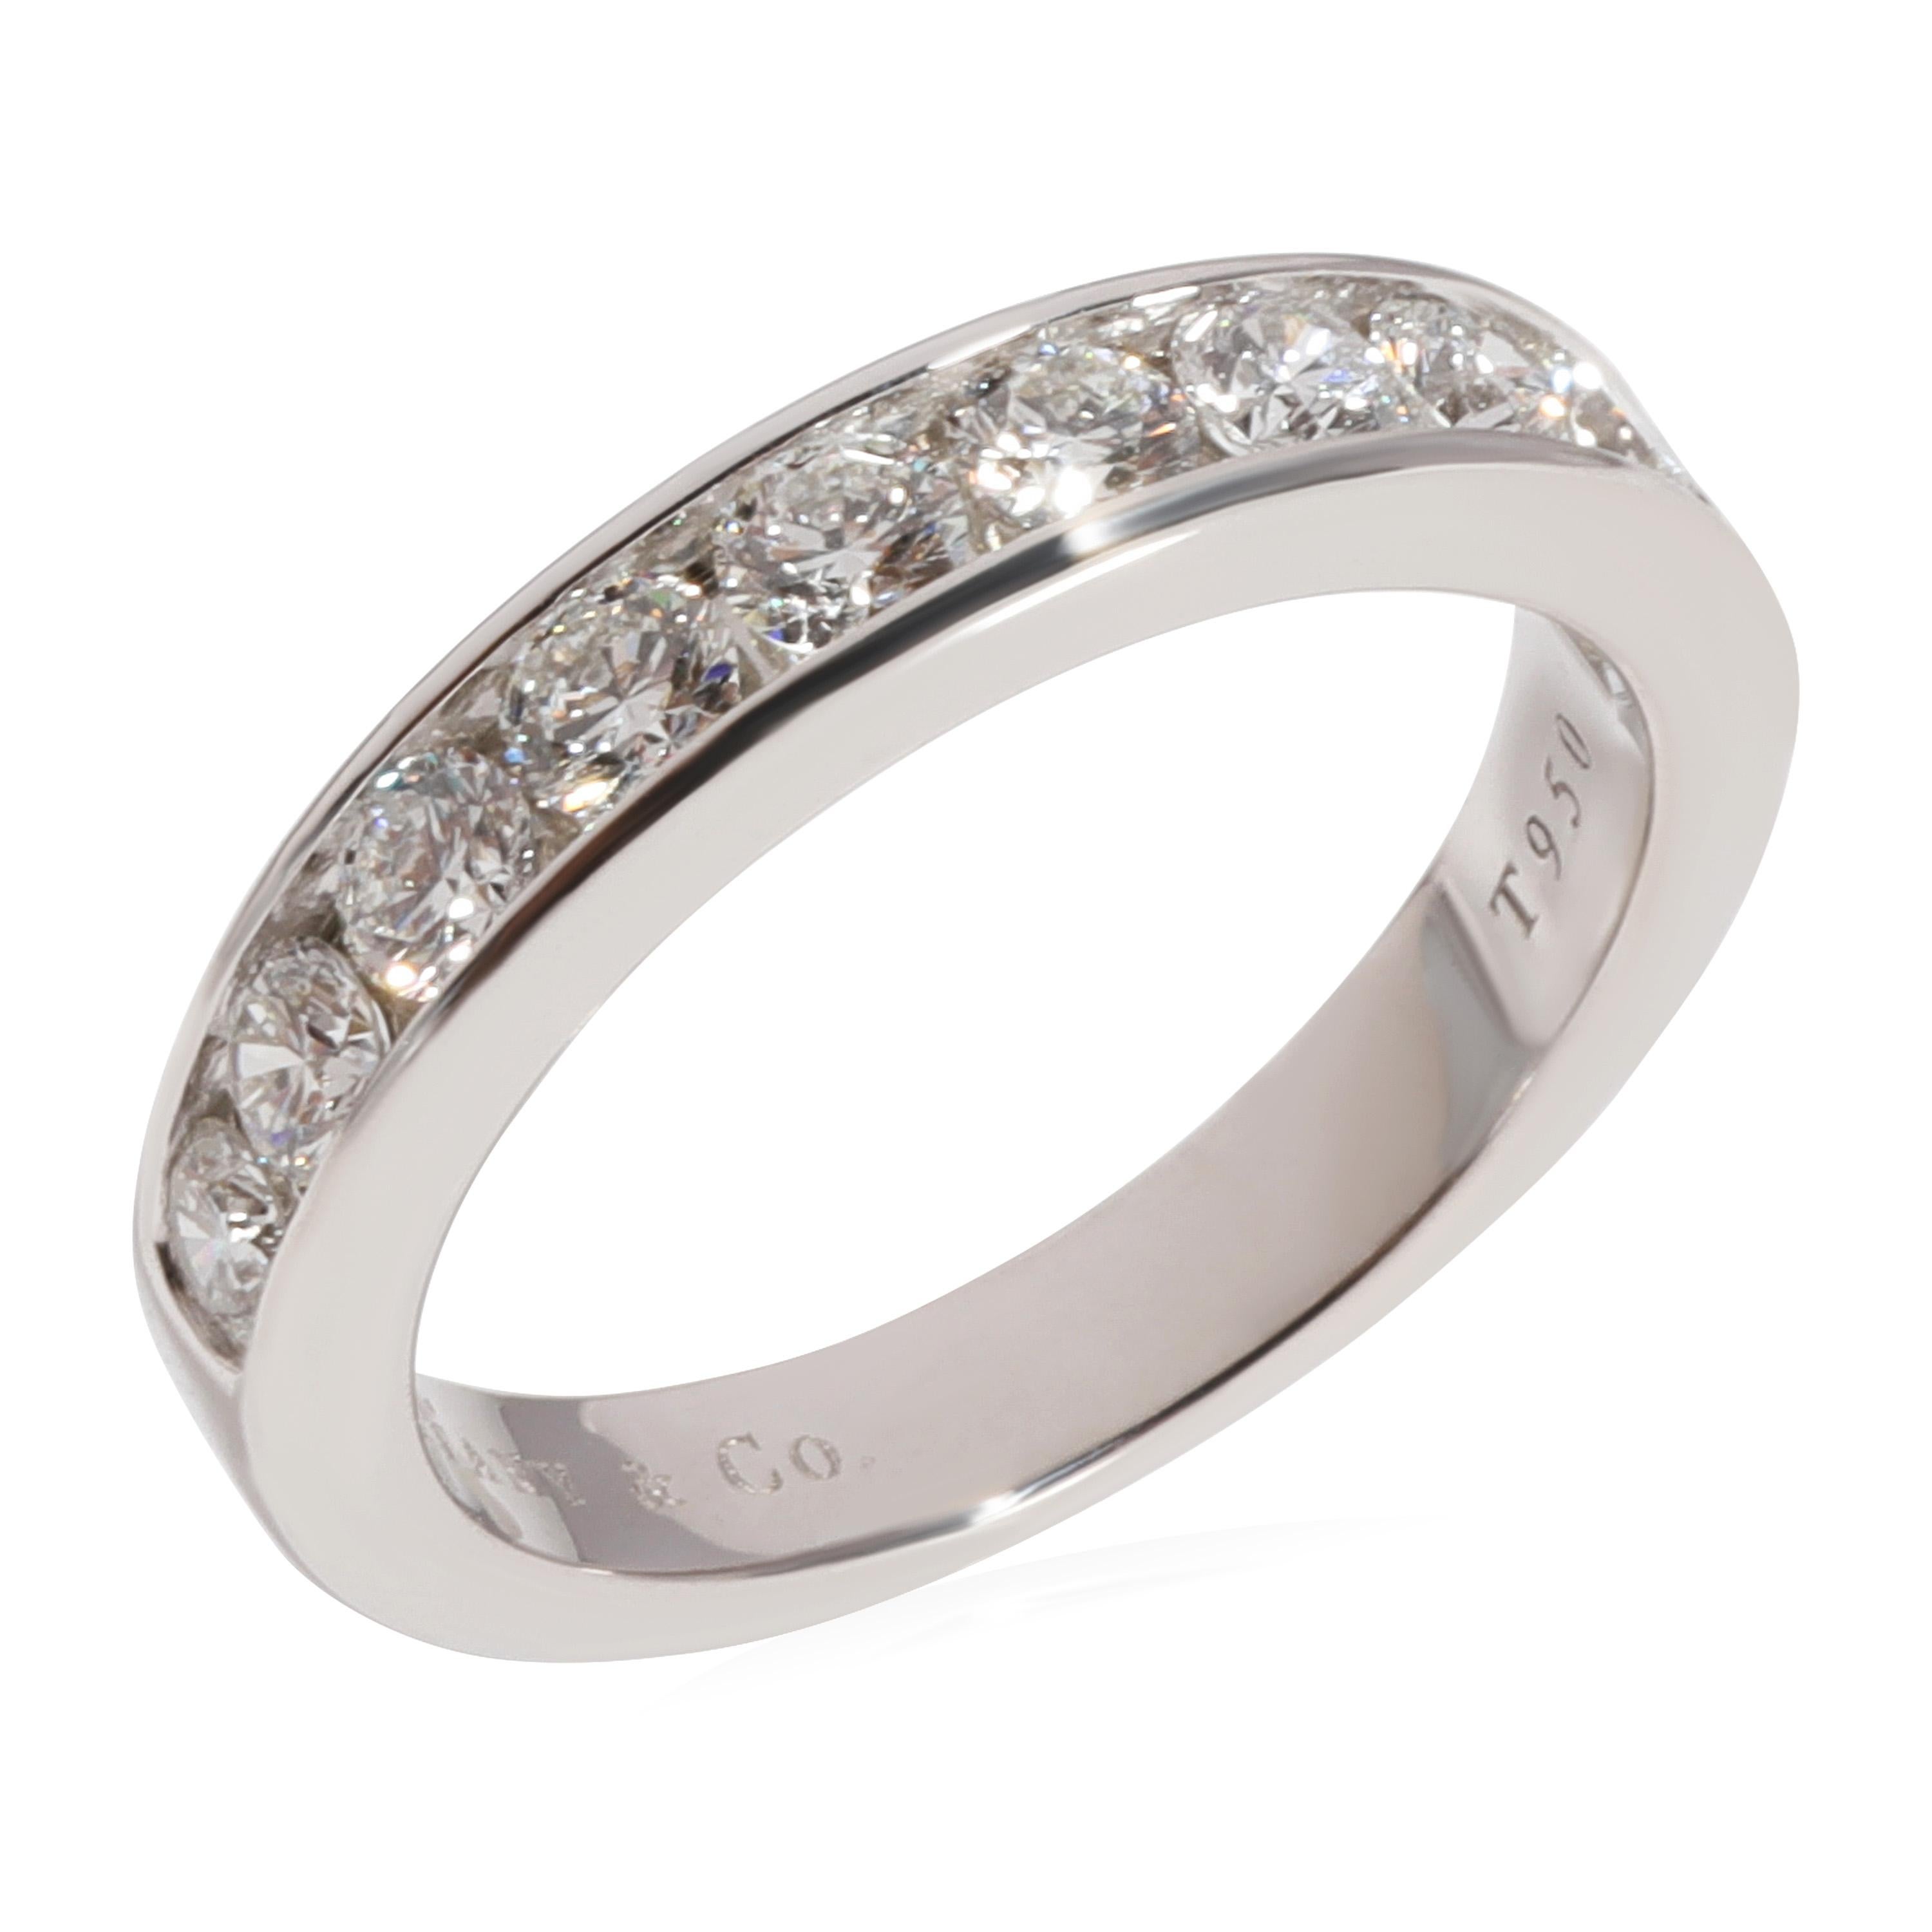 Tiffany & Co. Diamond Channel Wedding Band in Platinum 0.81 CTW

PRIMARY DETAILS
SKU: 121521
Listing Title: Tiffany & Co. Diamond Channel Wedding Band in Platinum 0.81 CTW
Condition Description: Retails for 6200 USD. In excellent condition and